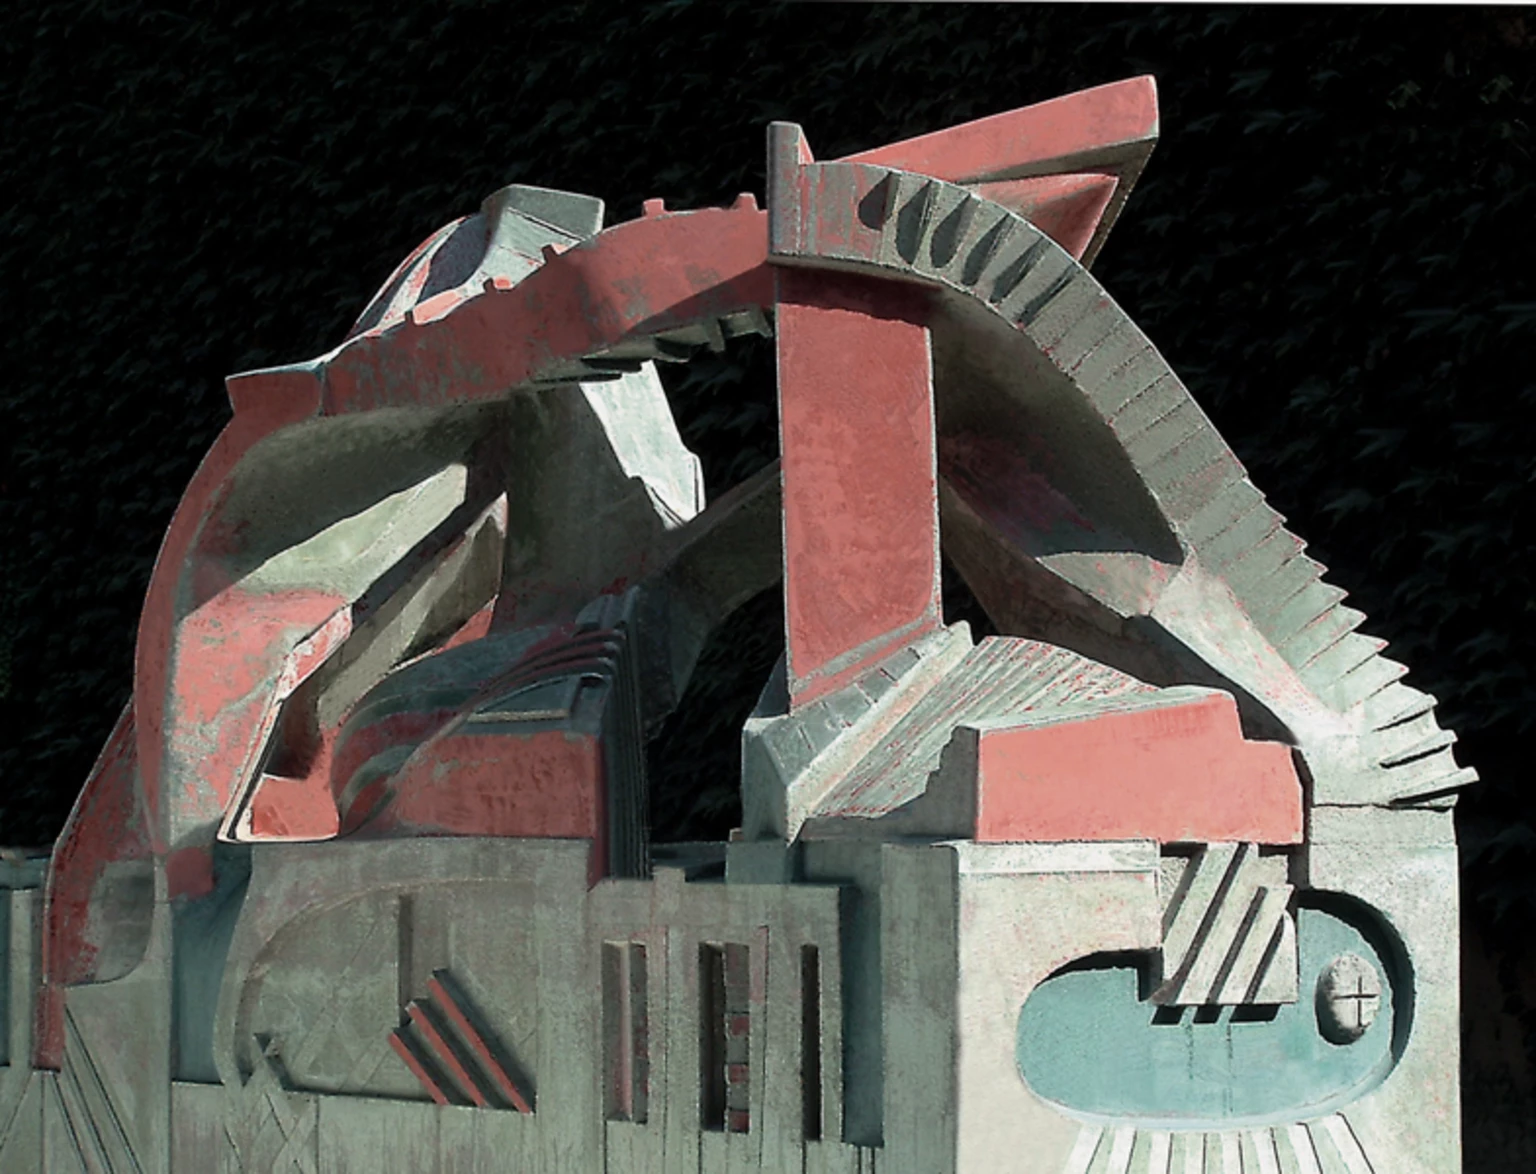 New Architectonic, 2002 - colored and painted concrete, 92 x 140 x 50 cm